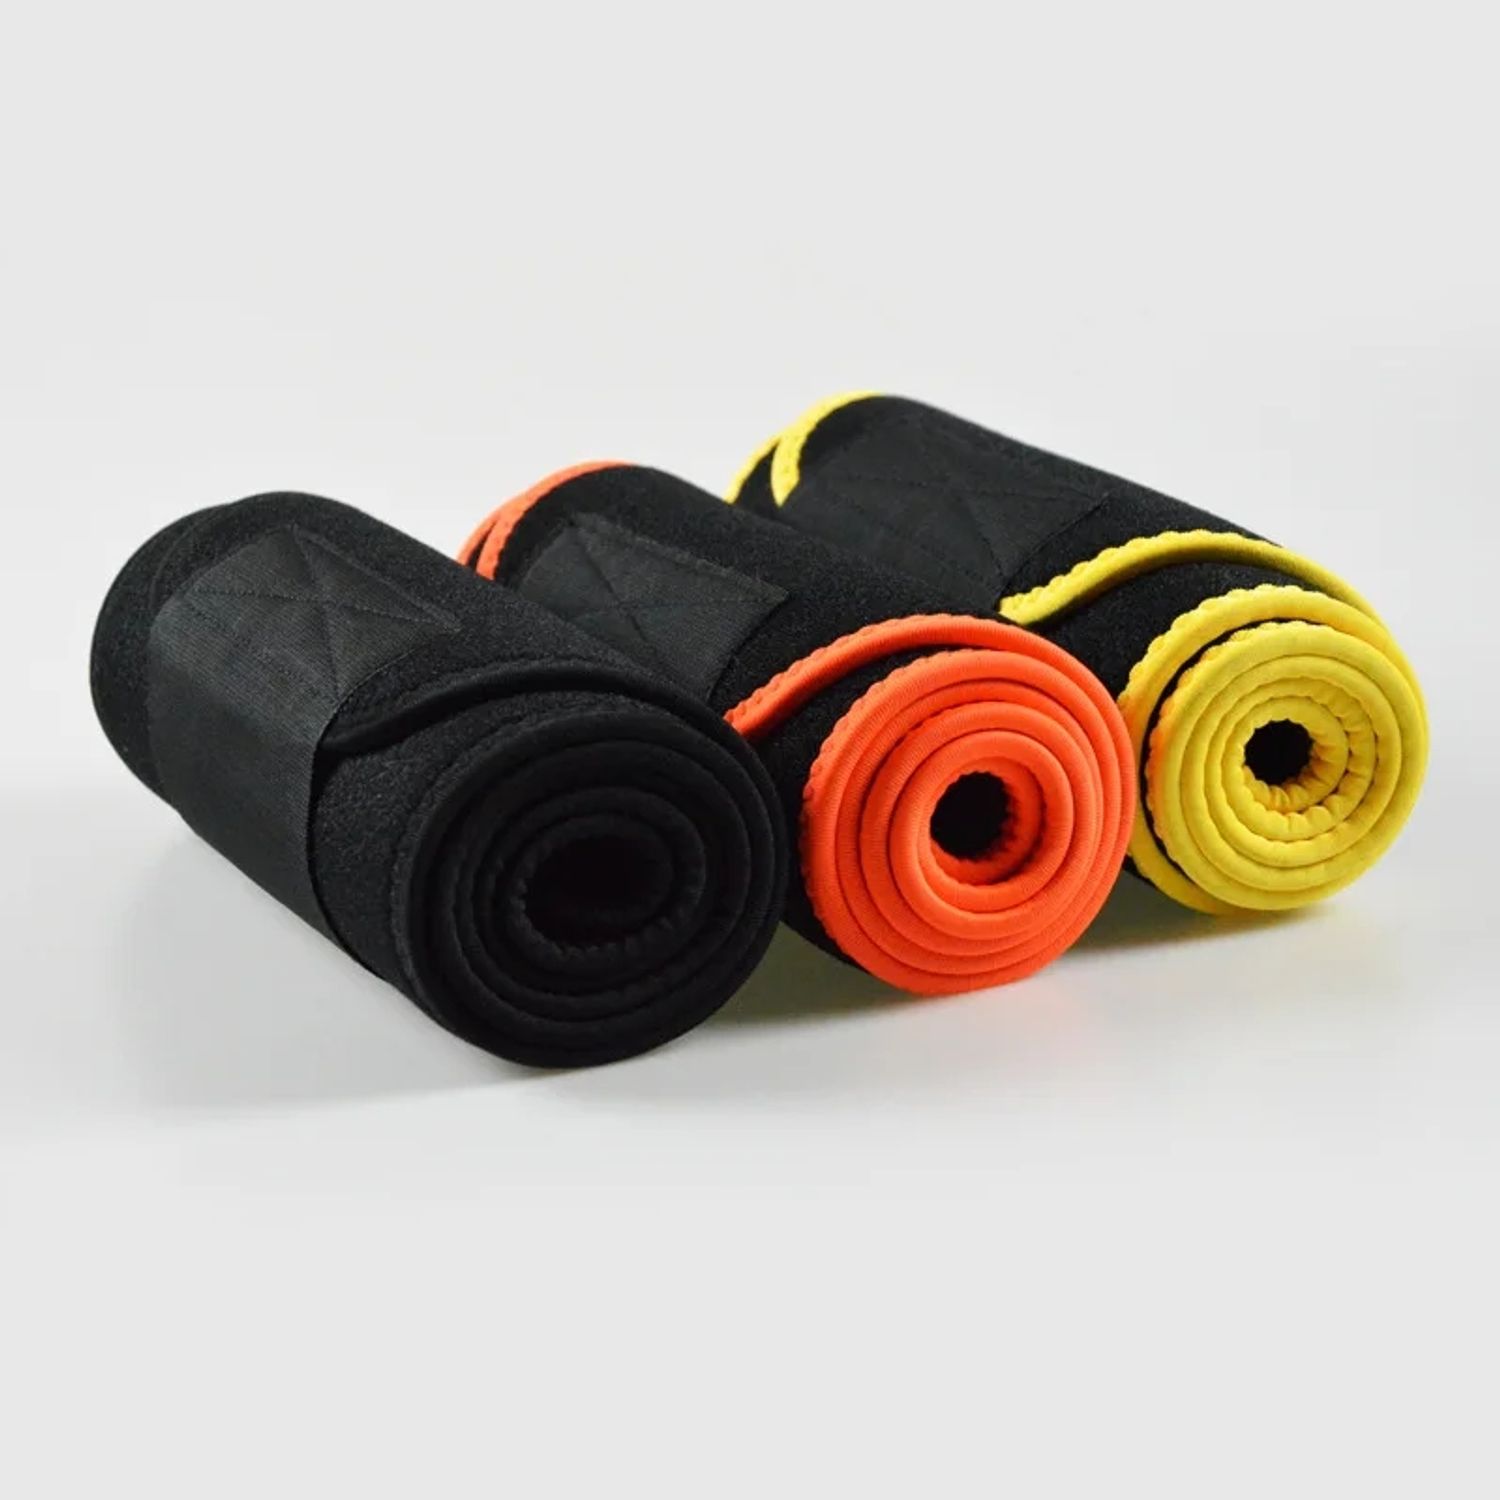 Lee-Mat Sweat Belly Band Roll with different colors: black, orange and yellow